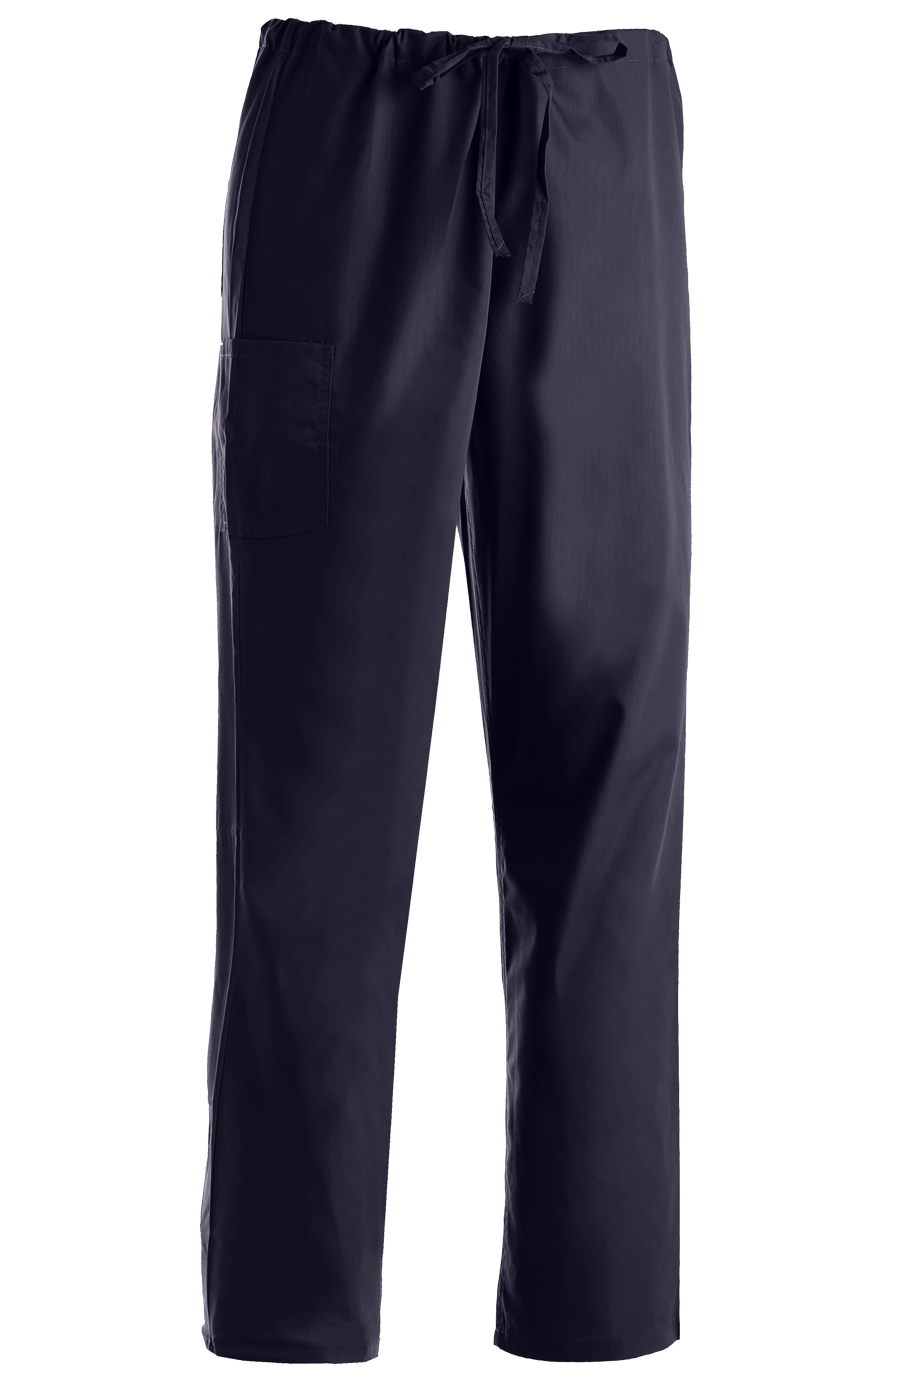 Housekeeping Pant With Cargo Pocket 2889